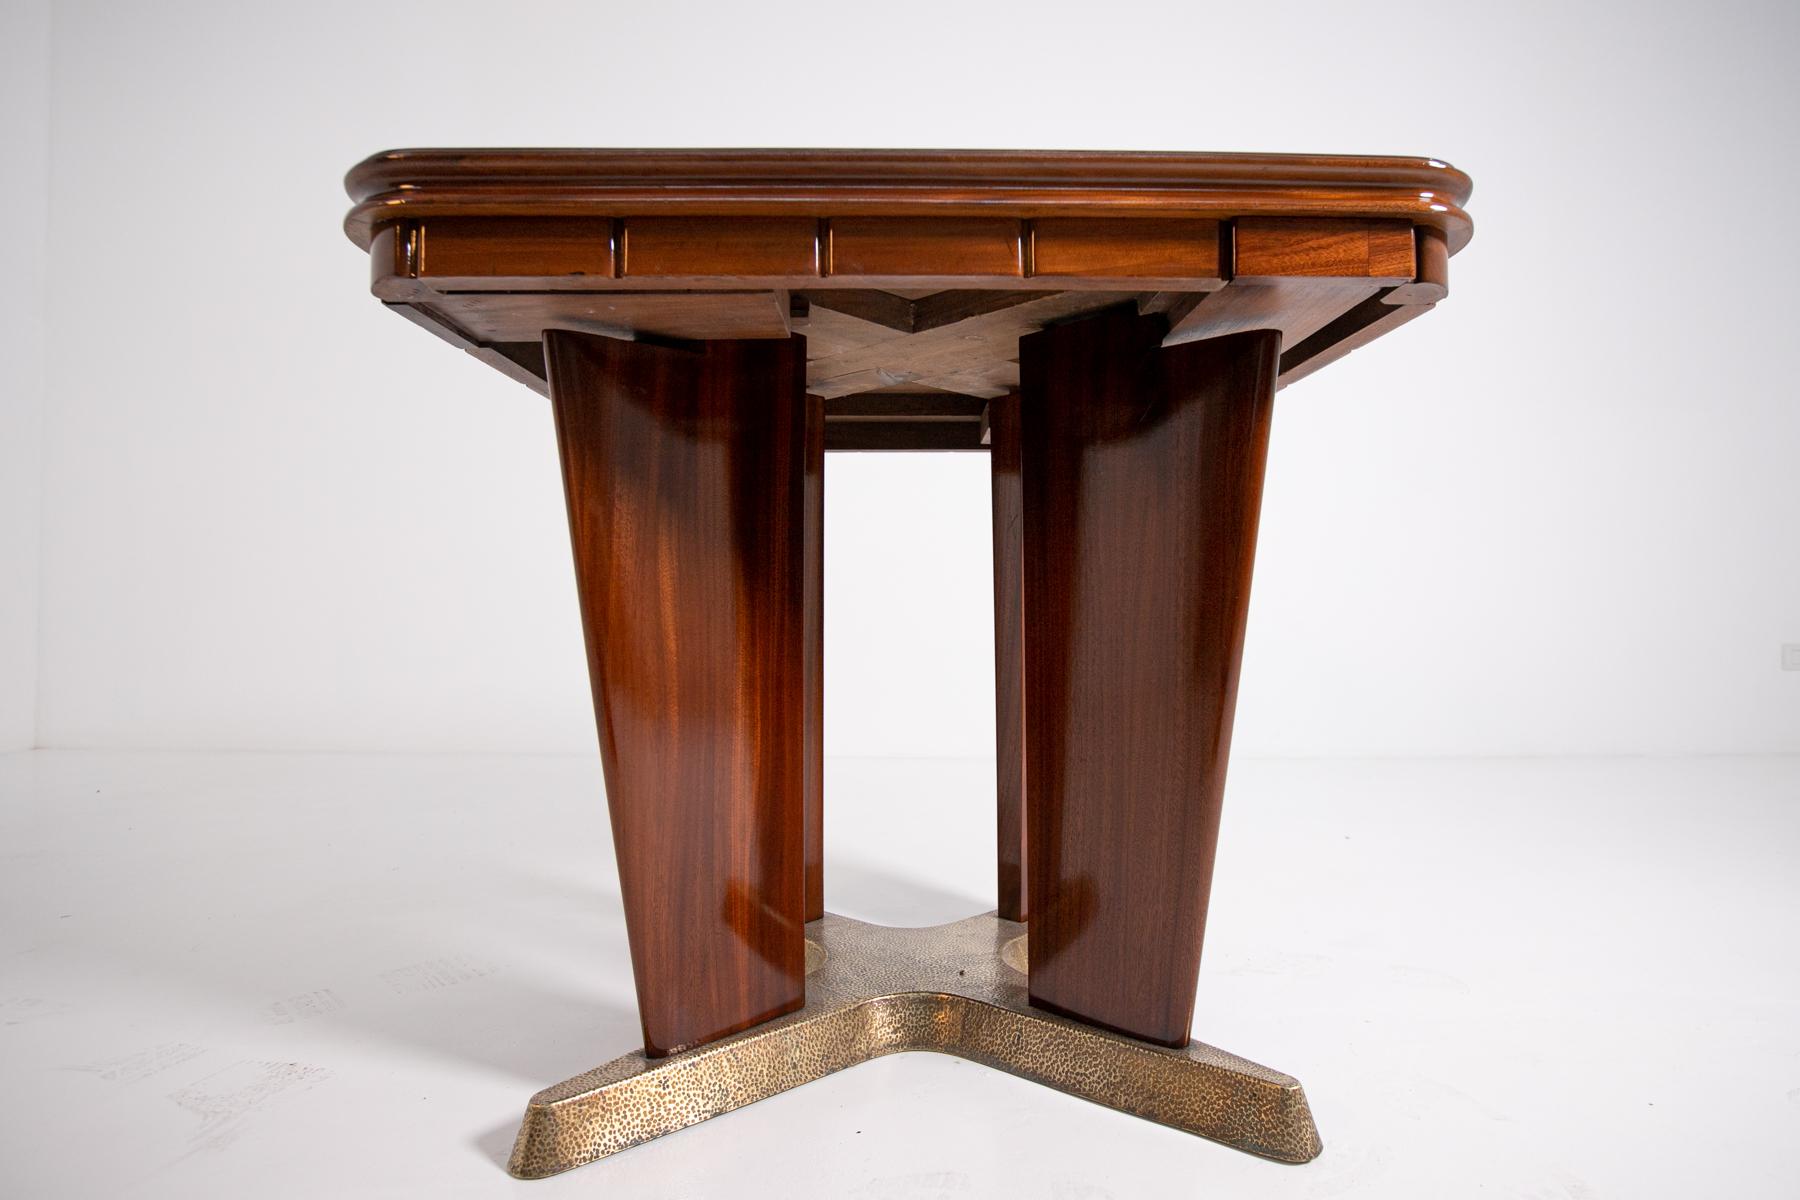 Mid-20th Century Italian Game Table by Giorgio Ramponi in Walnut and Brass, 1950s